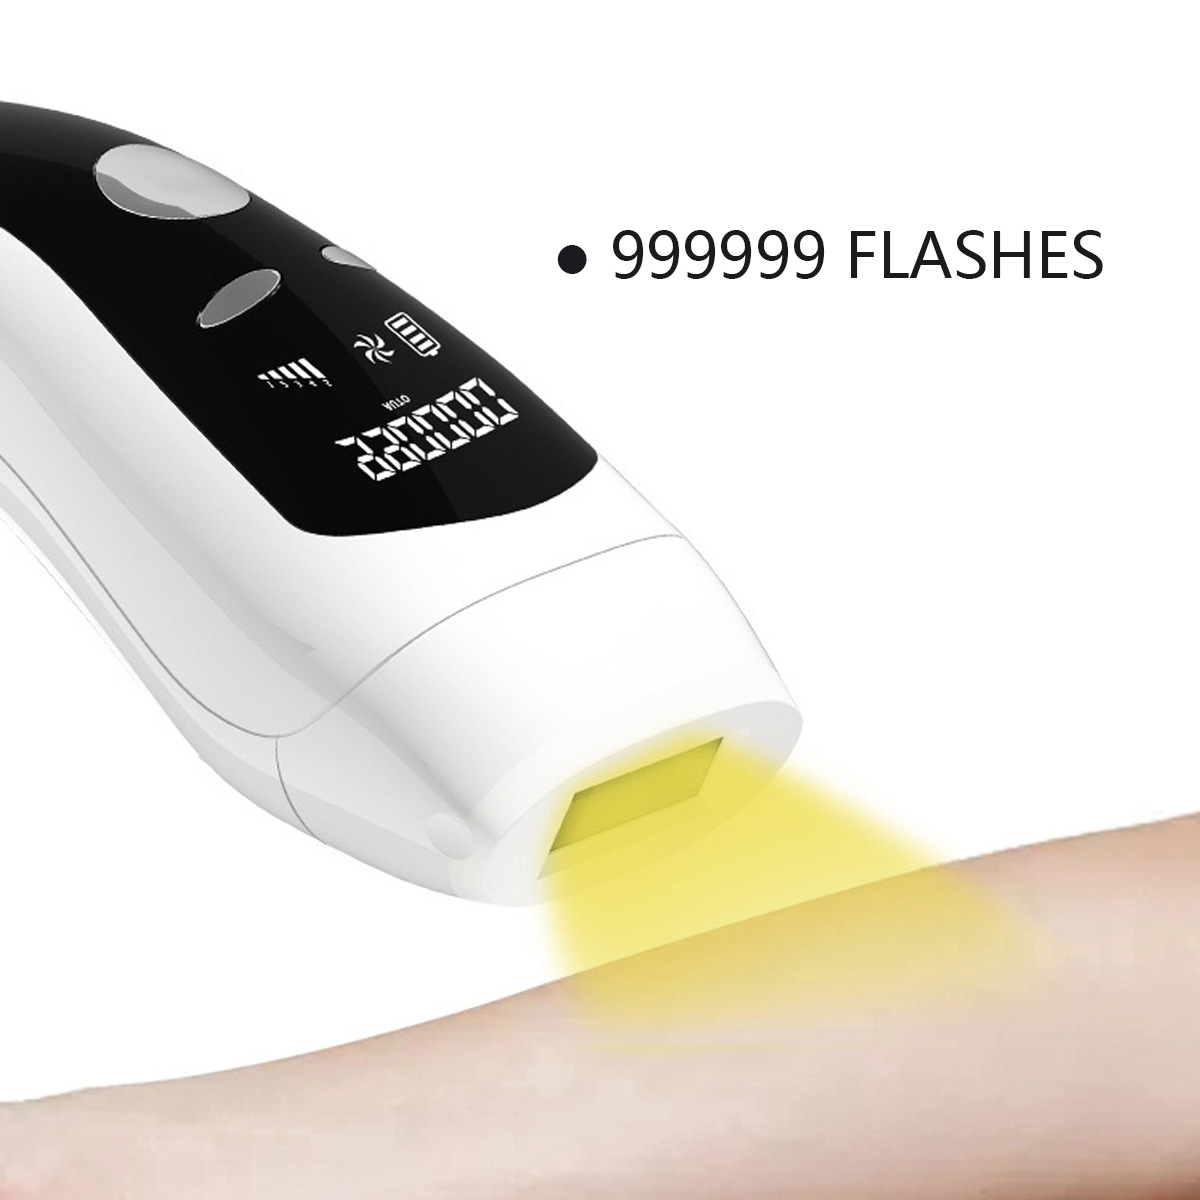 999999-Flashes-DIY-IPL-Laser-Hair-Removal-Device-5-Levels-Painless-Epilator-Hair-Remover-1837621-6